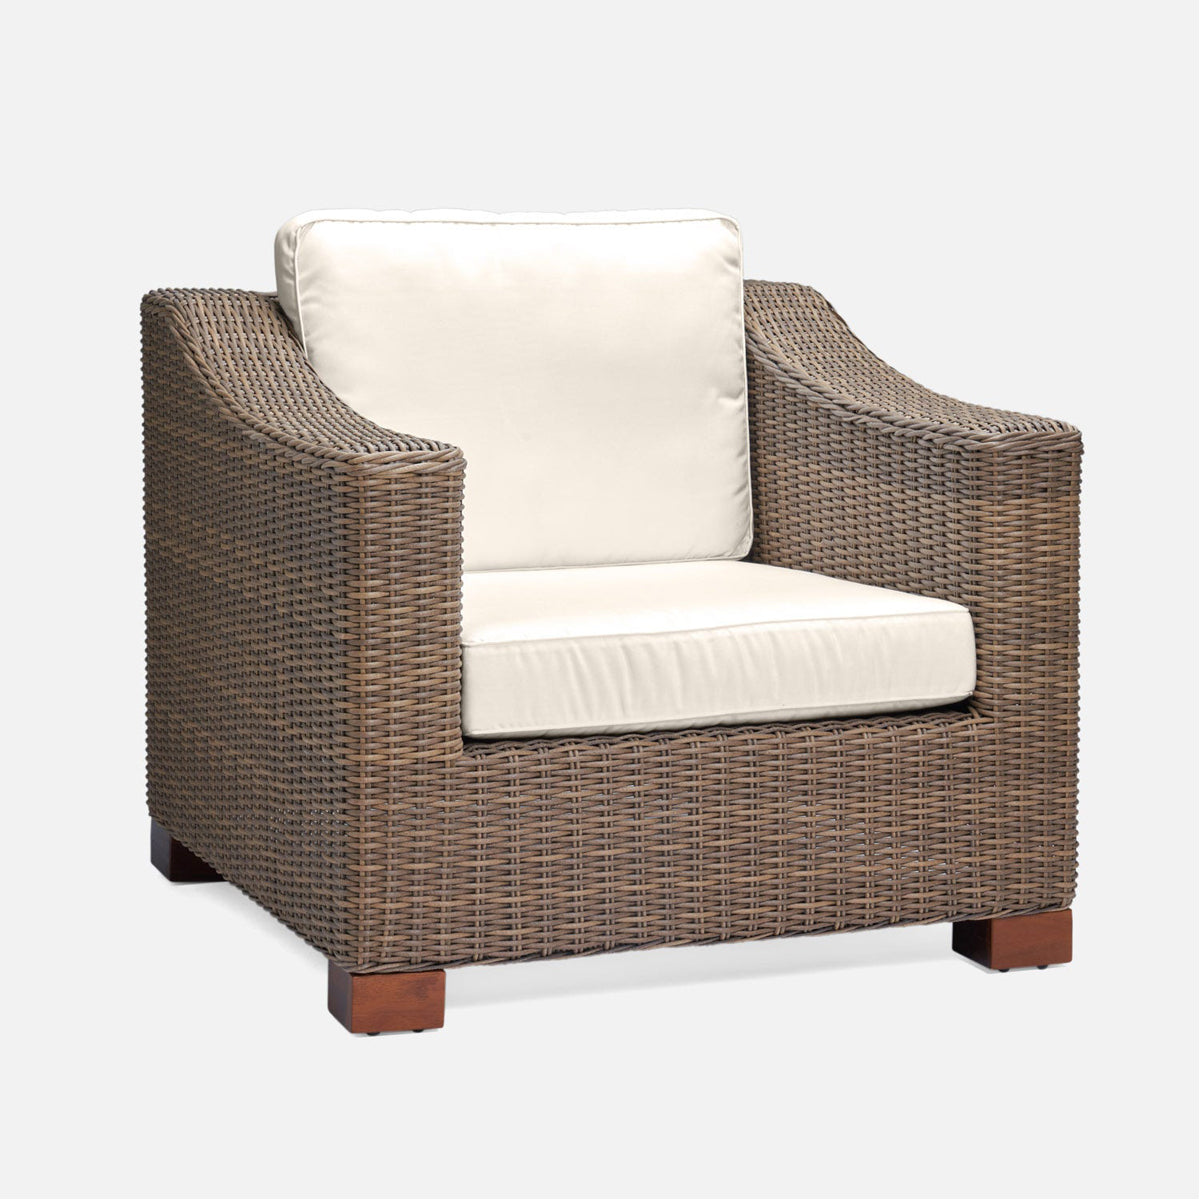 Made Goods Marina Outdoor Lounge Chair with Cushions in Pagua Fabric